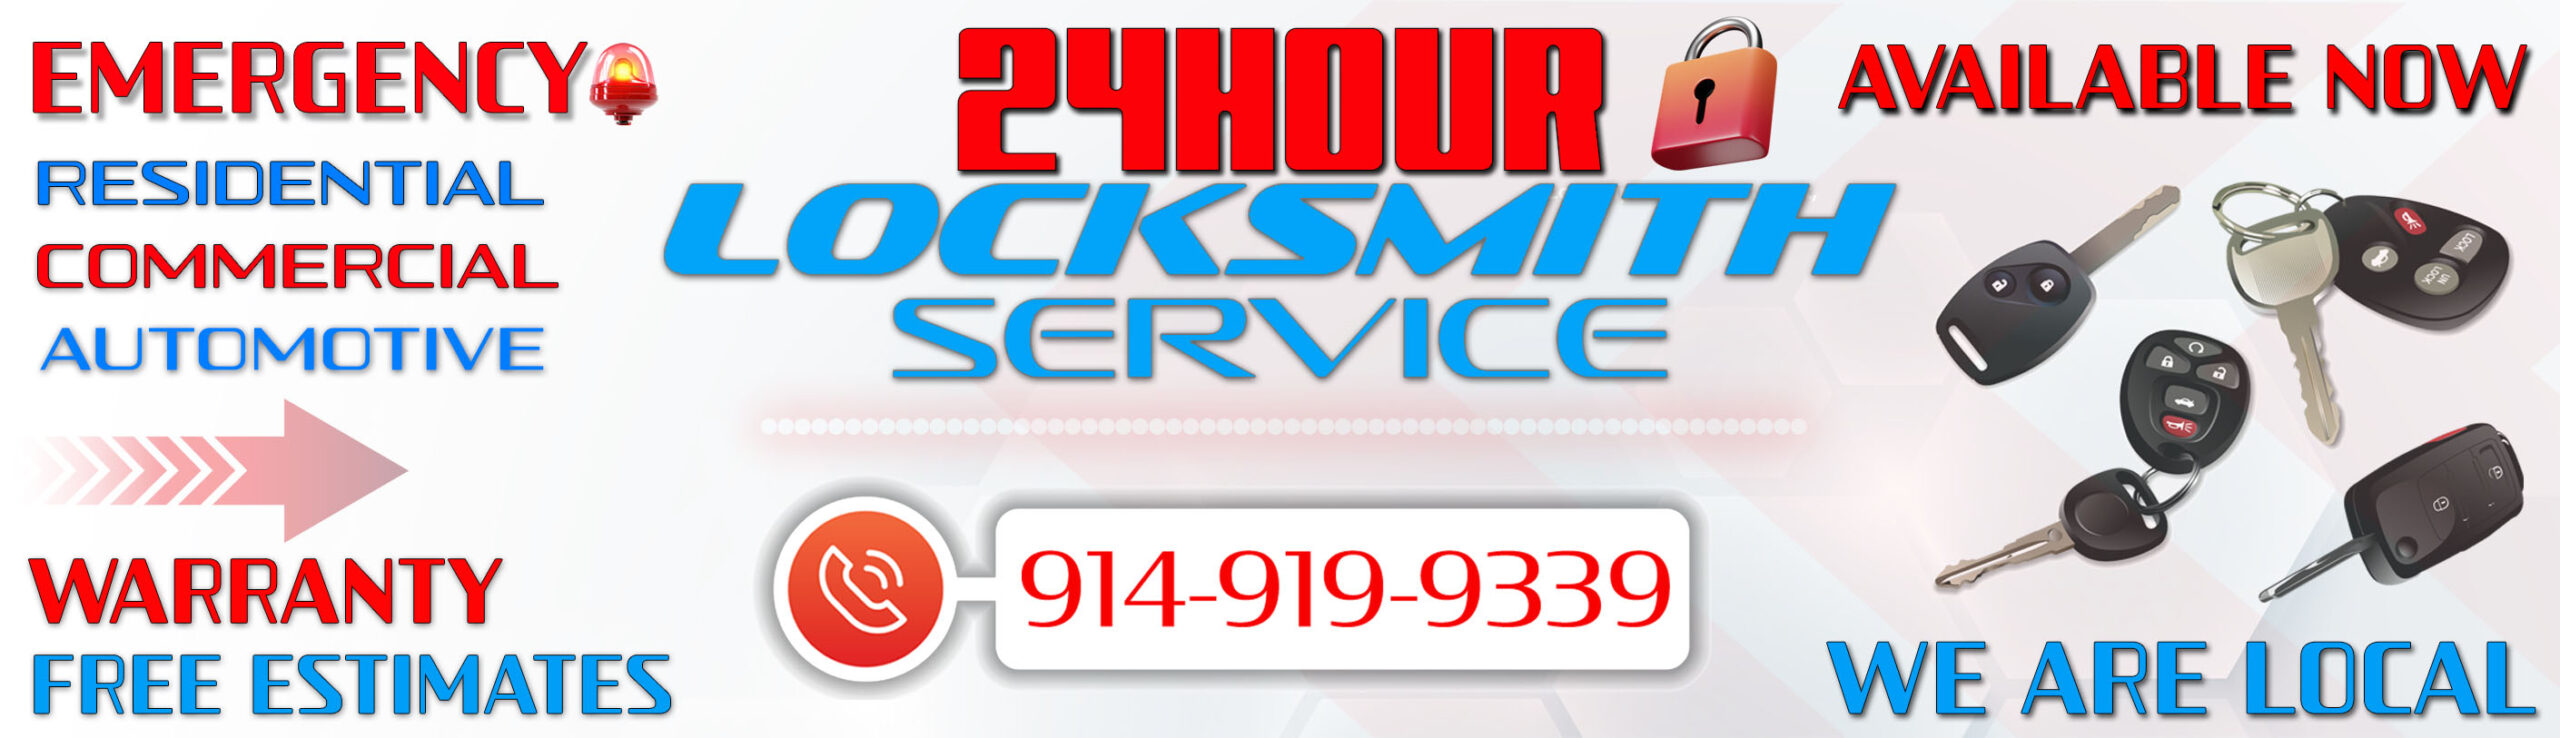 LOCKSMITH SERVICES IN YOUR AREA